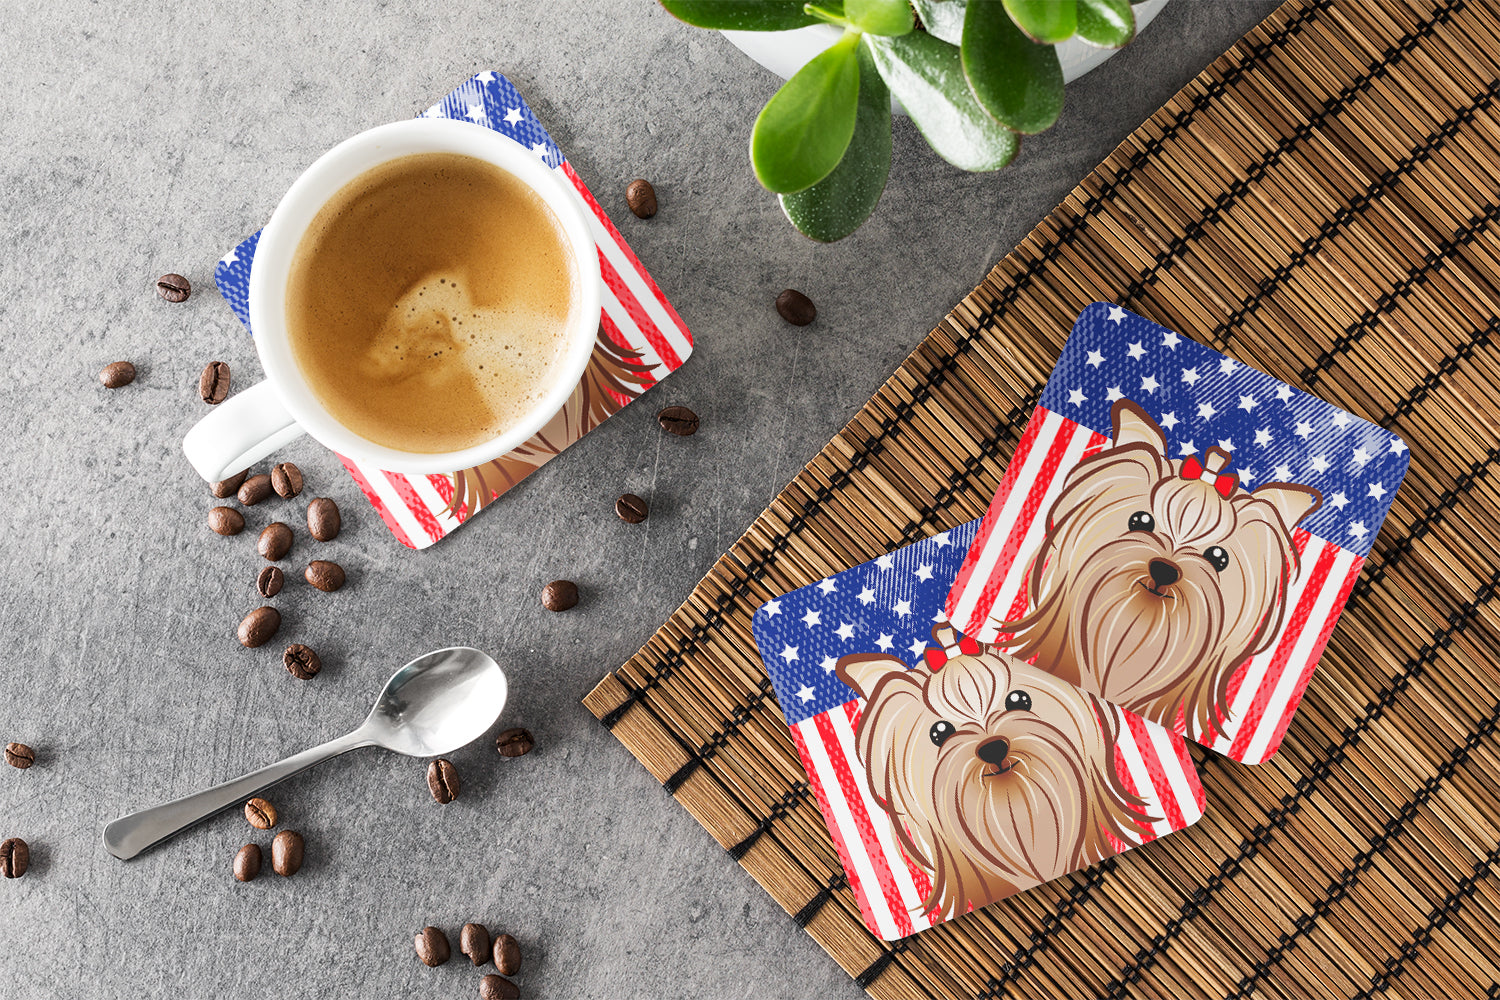 American Flag and Yorkie Yorkishire Terrier Foam Coaster Set of 4 - the-store.com